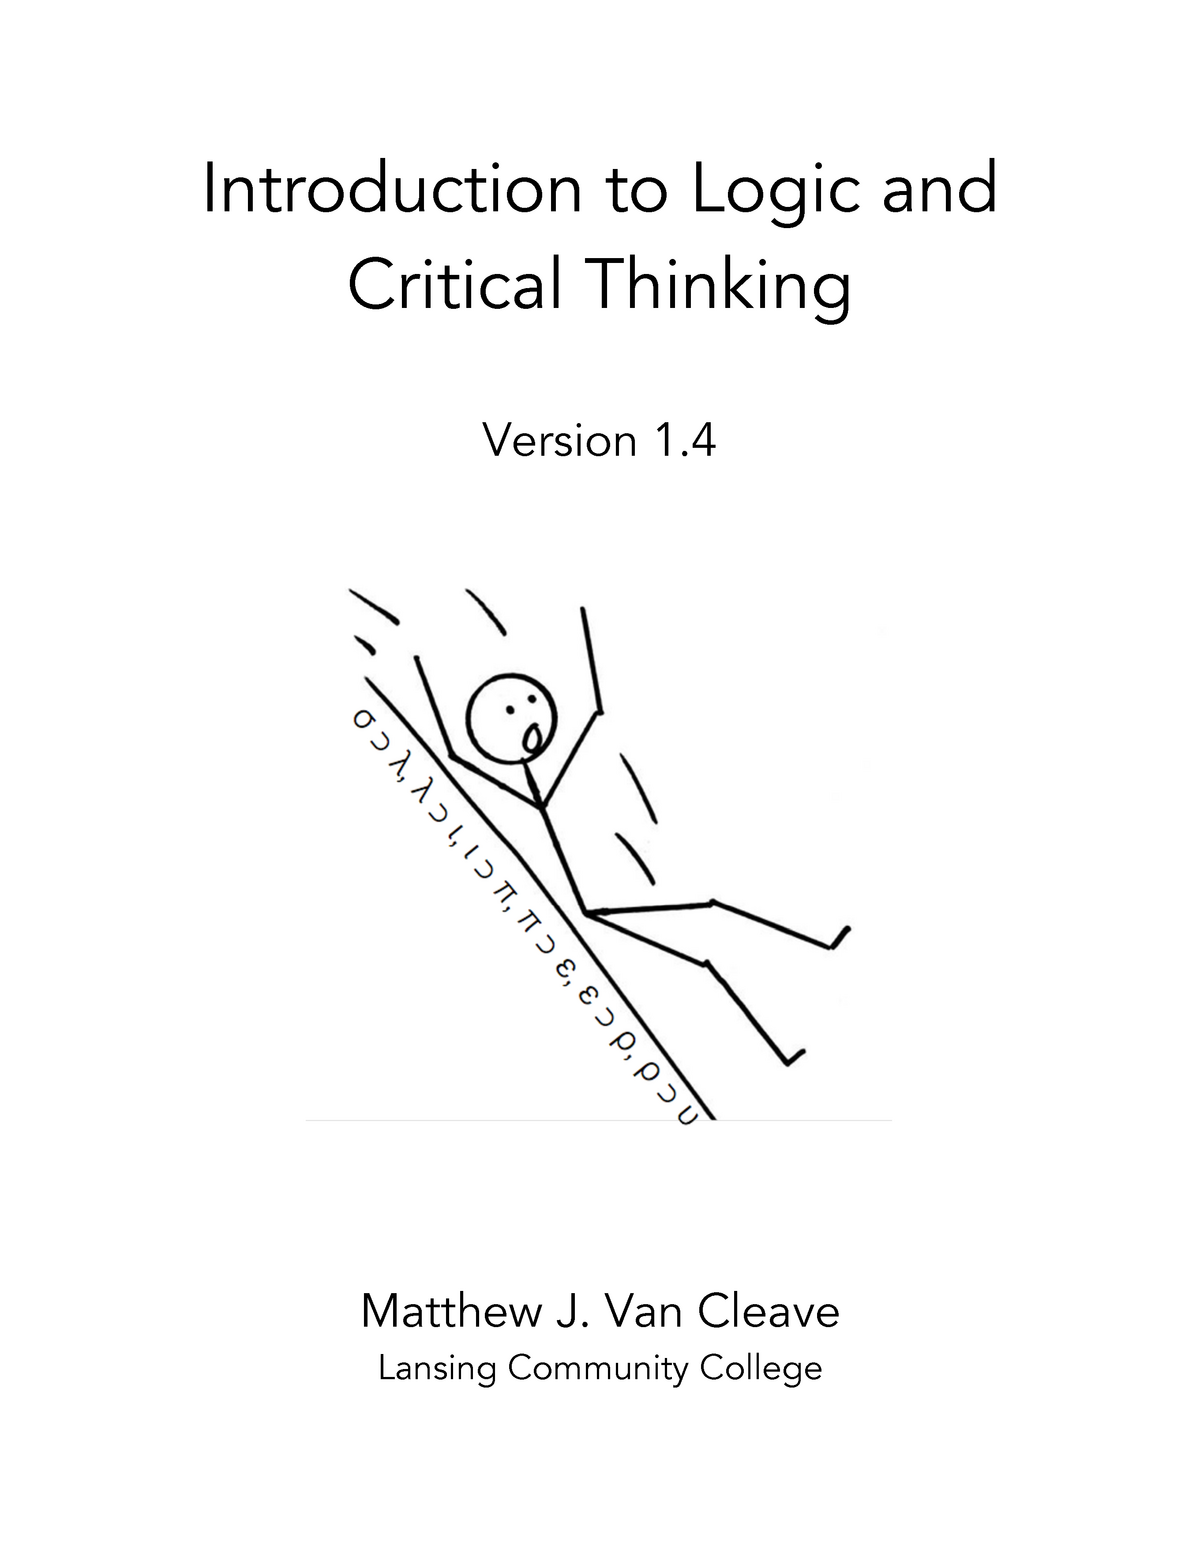 logic and critical thinking notes pdf